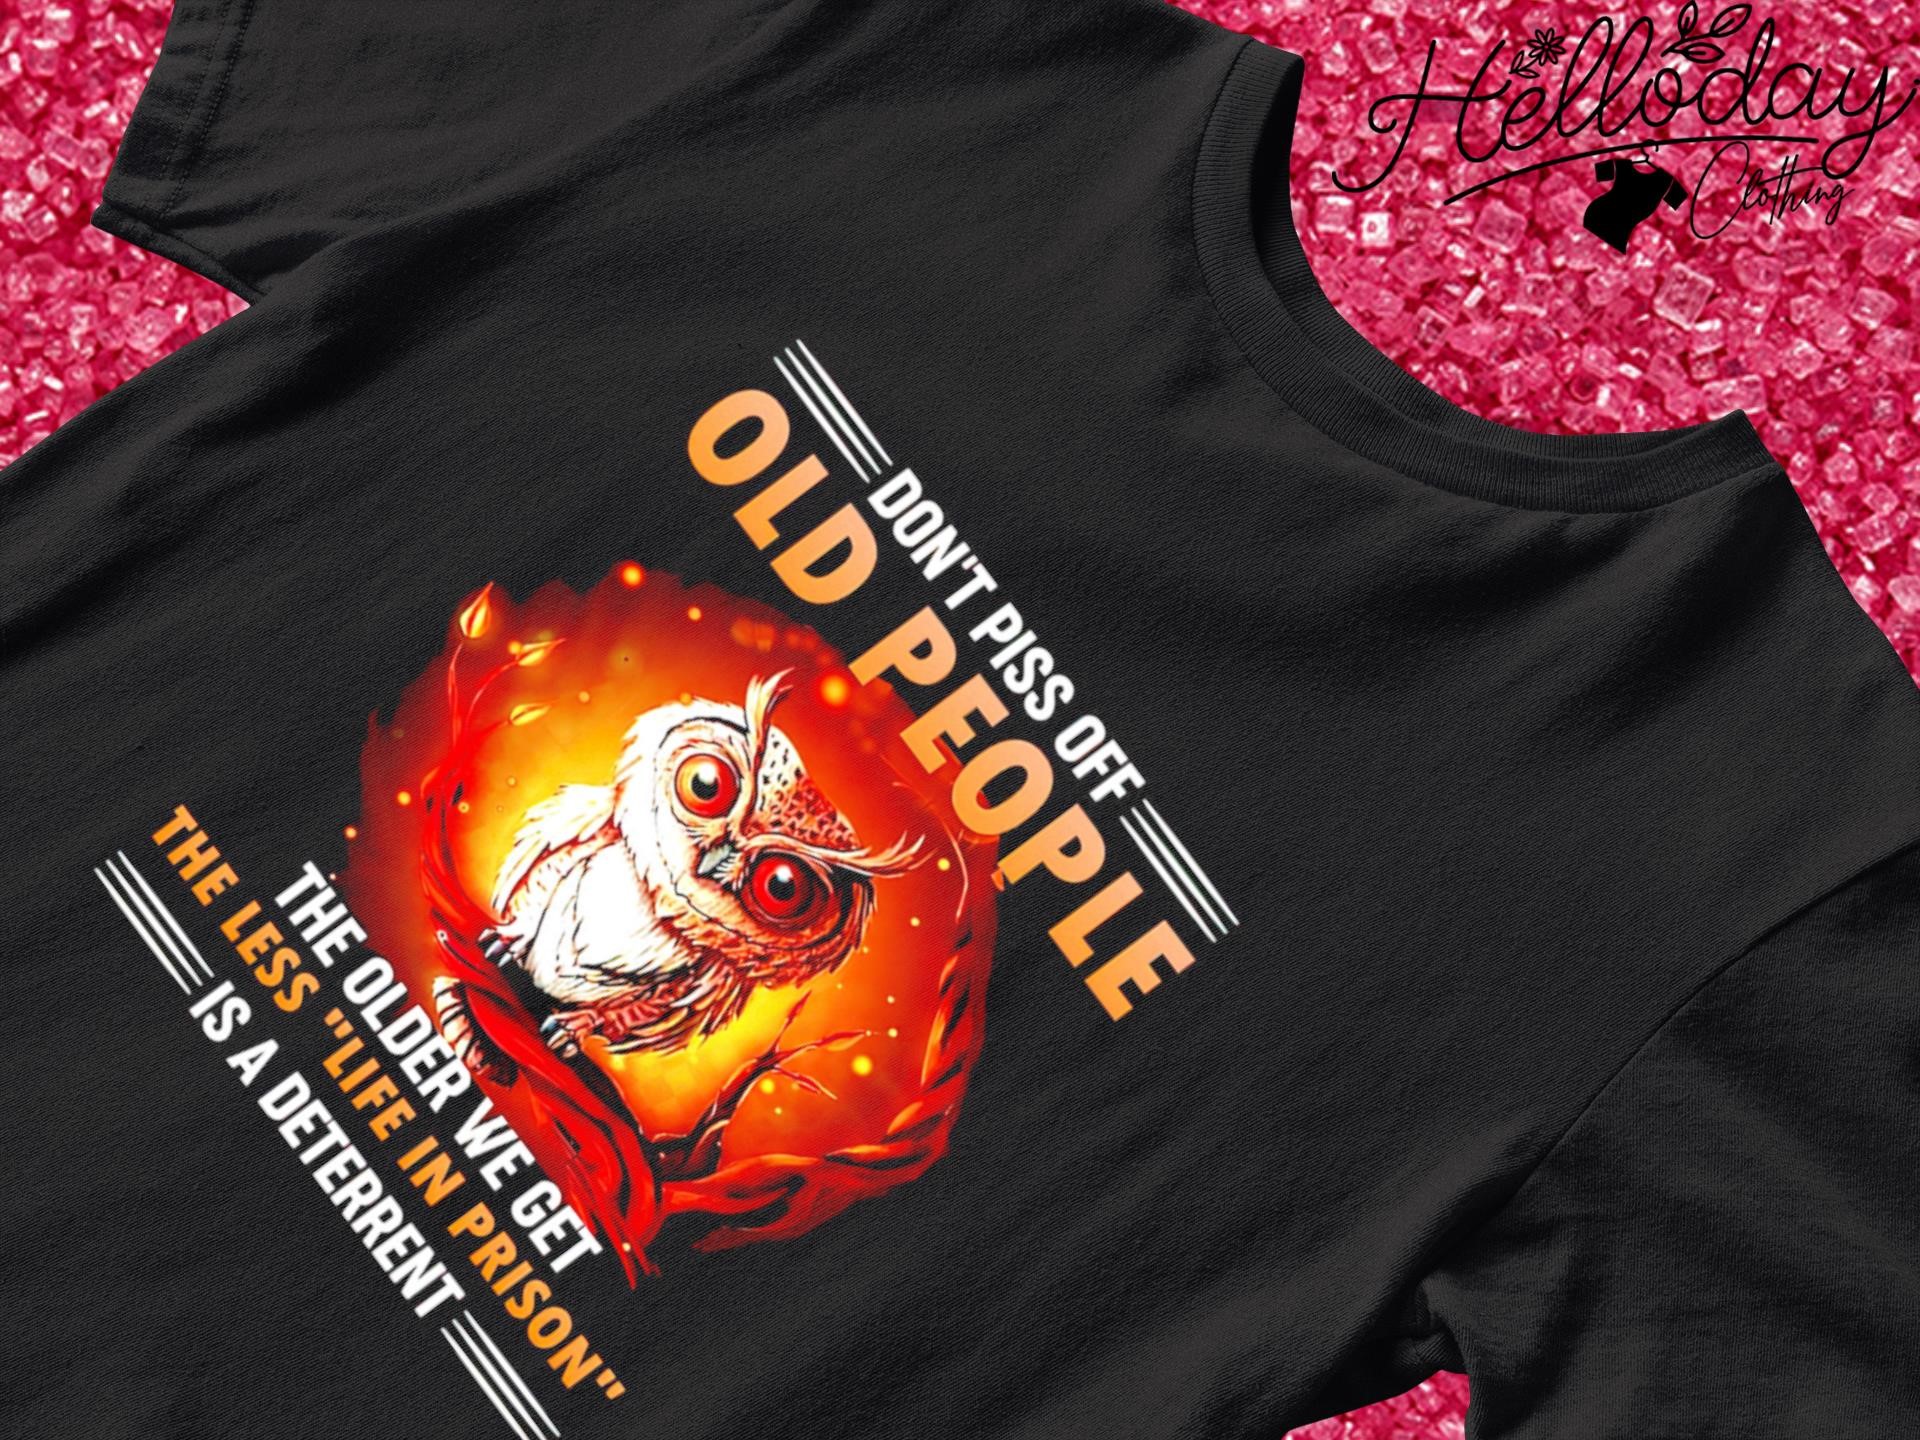 Owl don't piss off old people the older we get the less life in prison is a deterrent shirt